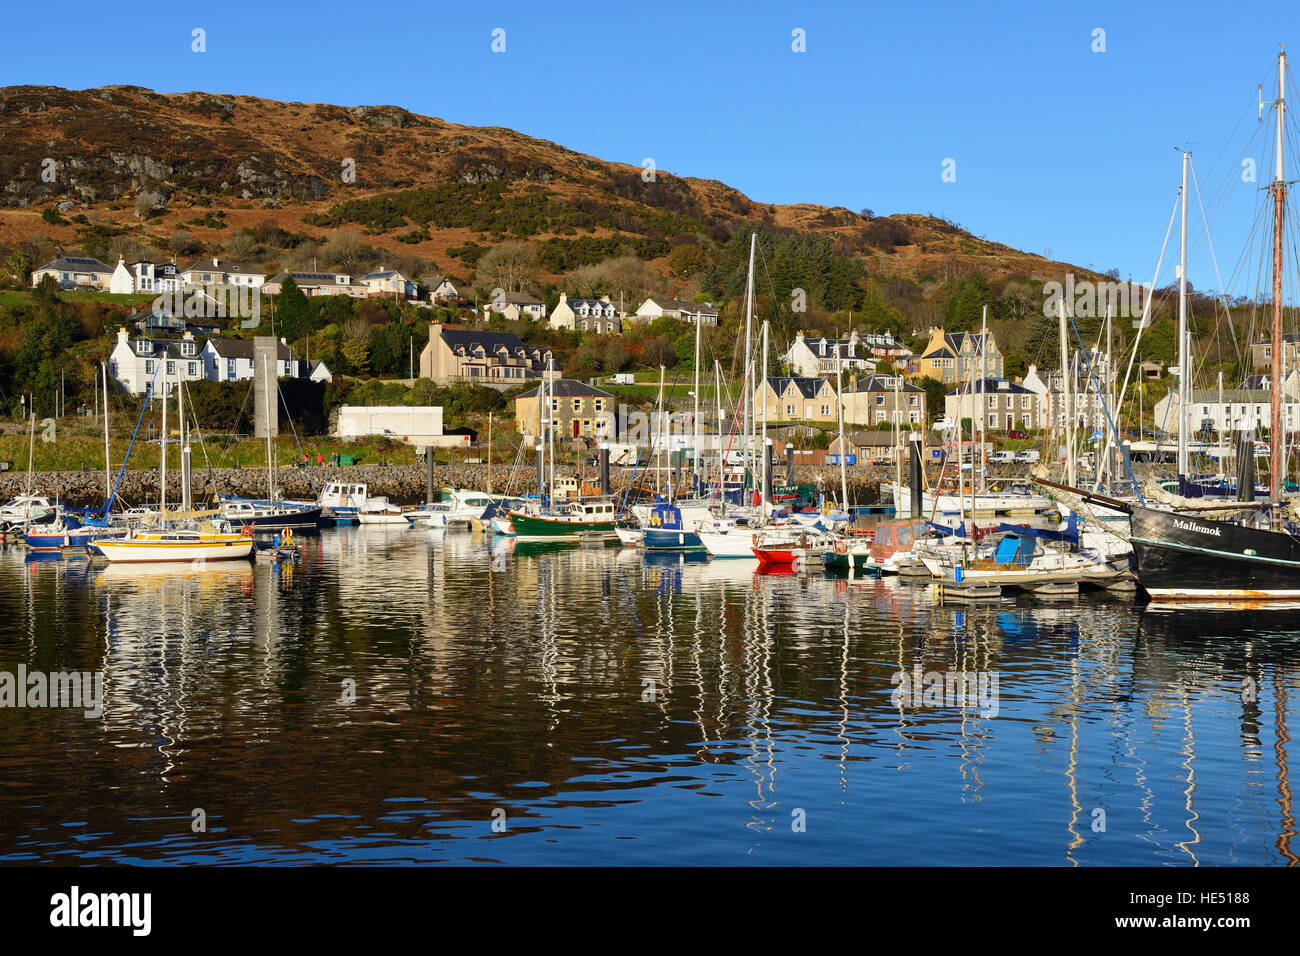 Marina at fishing village of Tarbert on Loch Fyne in Argyll and Bute, Scotland Stock Photo